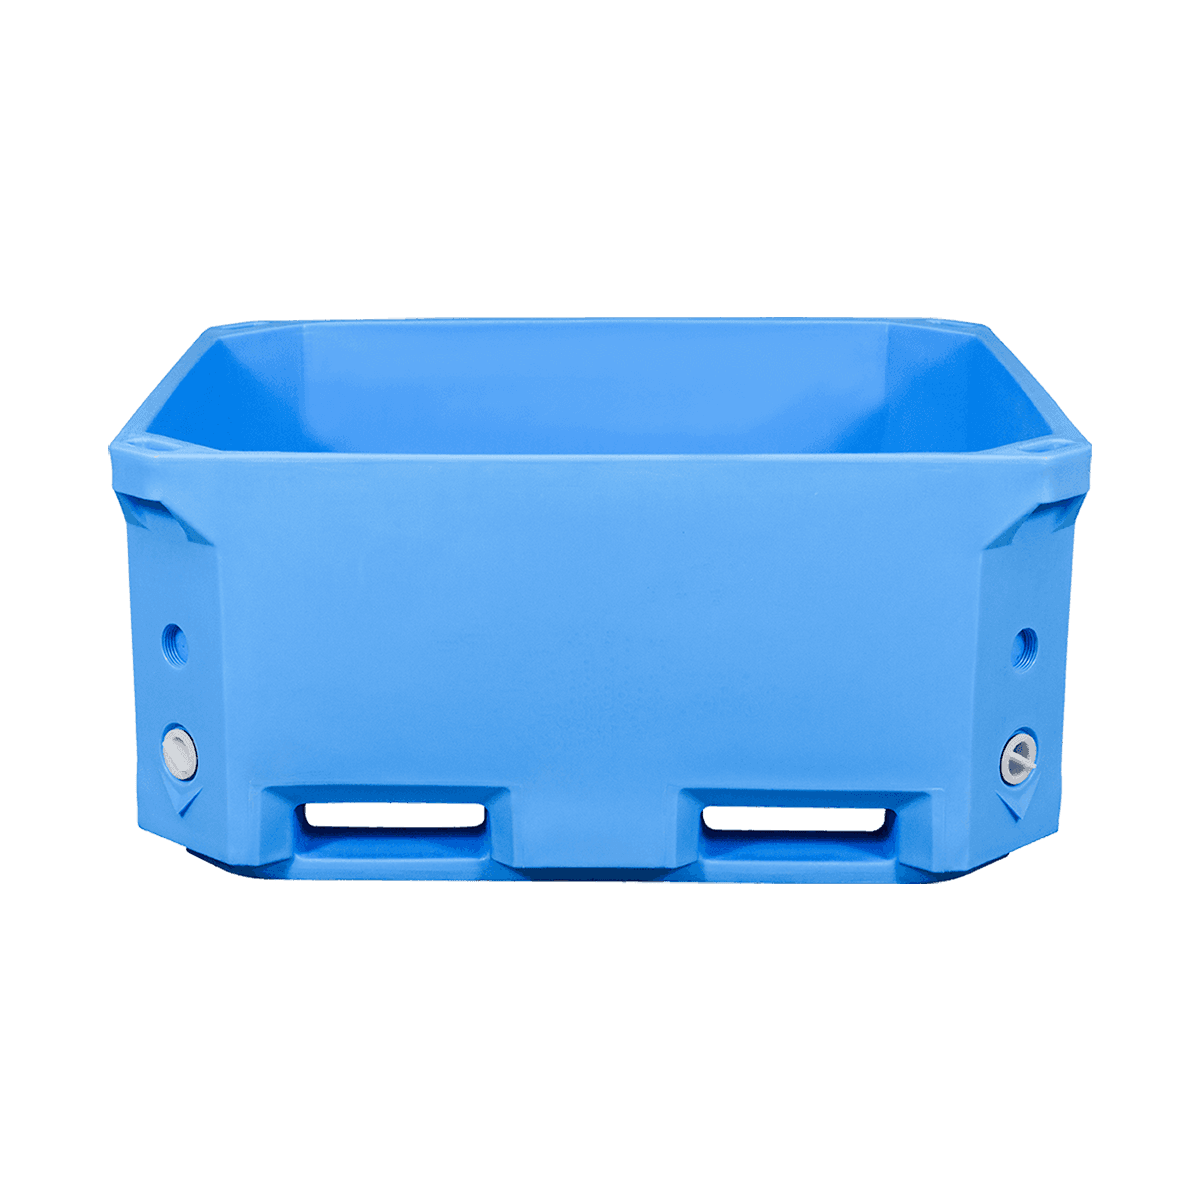 Insulated Storage Containers Can Be Used In Different Fields